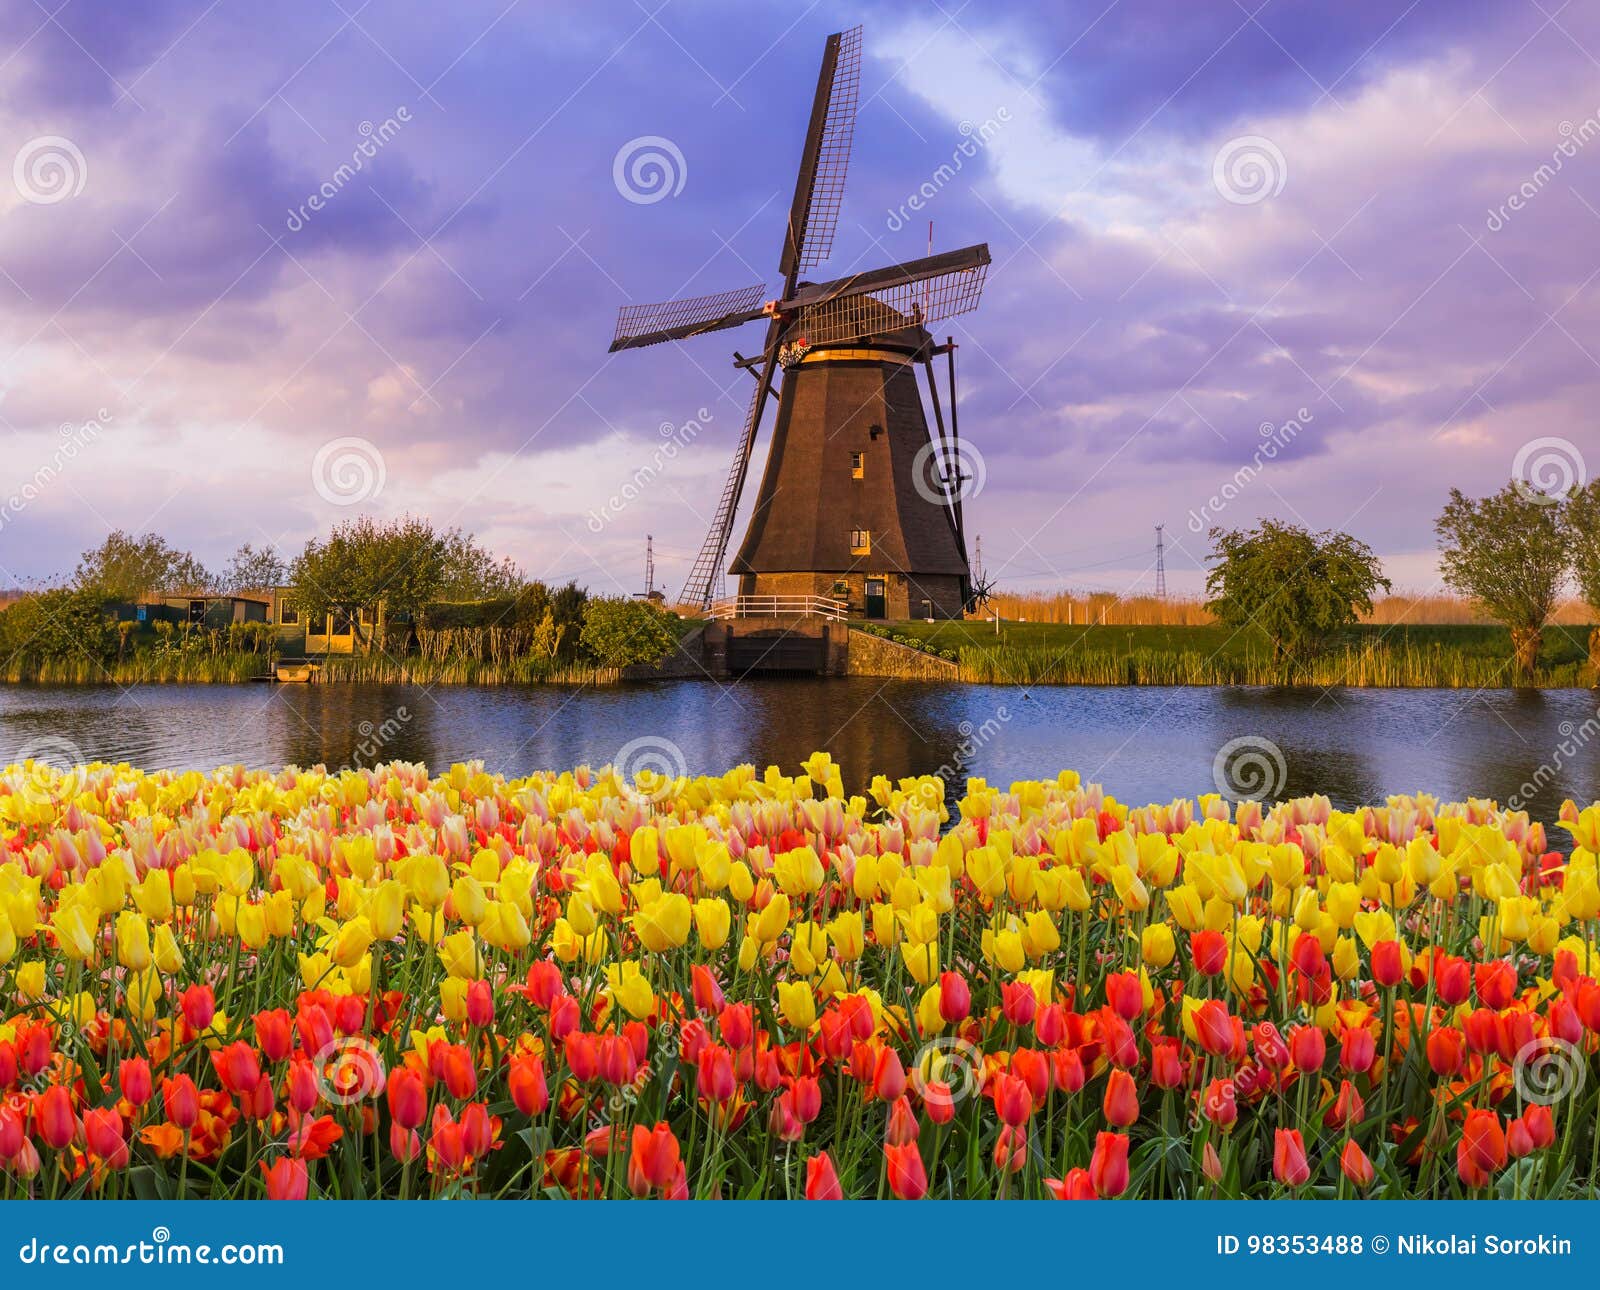 windmills and flowers in netherlands